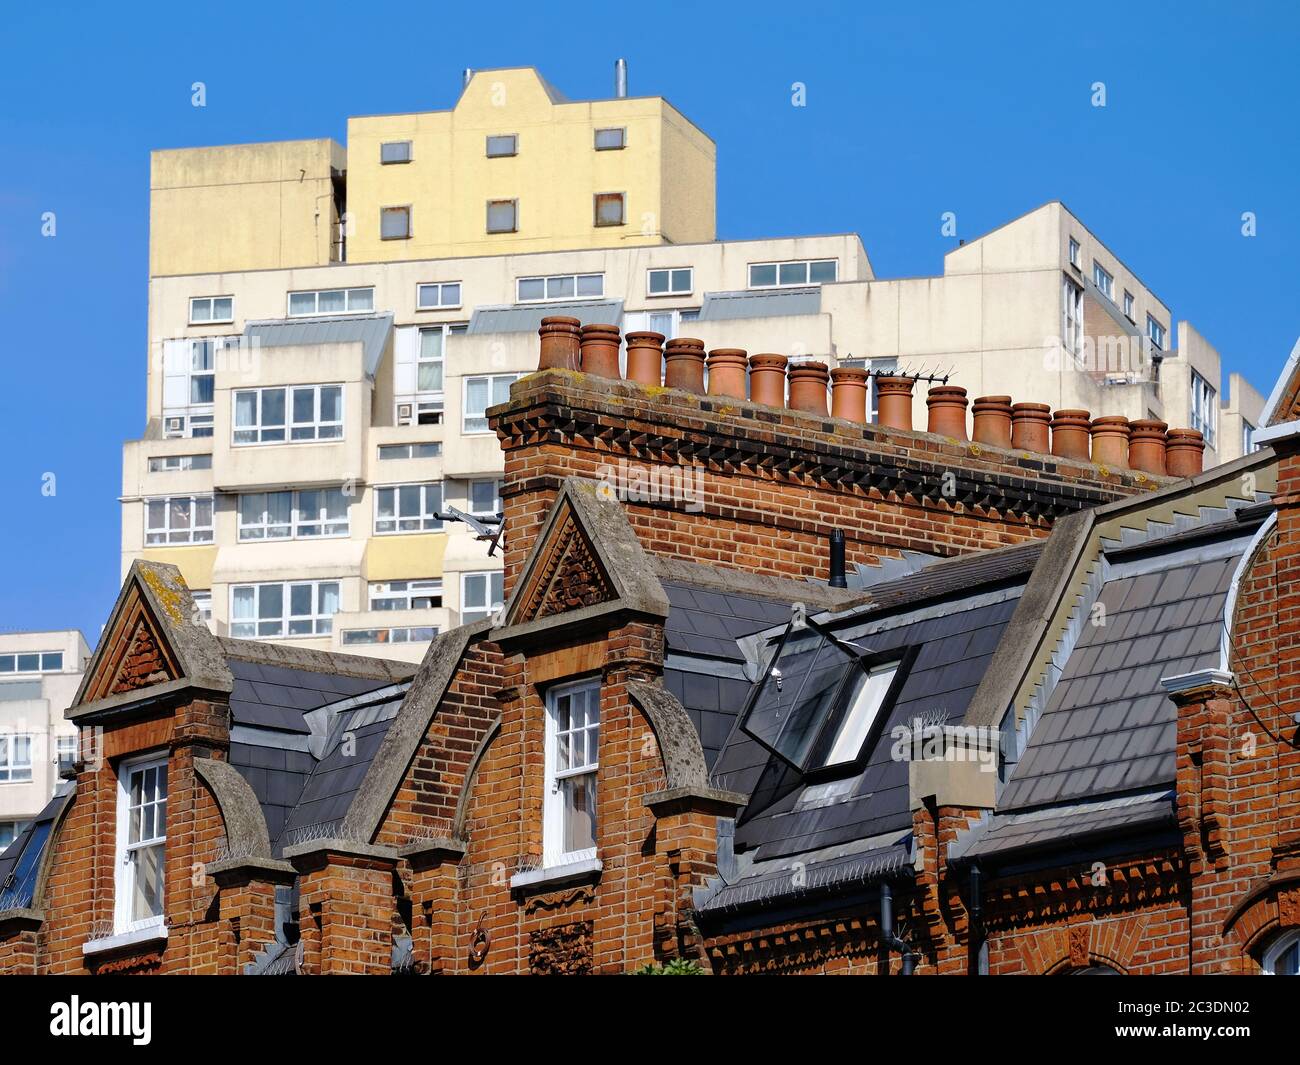 Edwardian red-brick housing Stockwell, south London with the Brutalist style towers of Beckett and Pinter house seen behind. Stock Photo